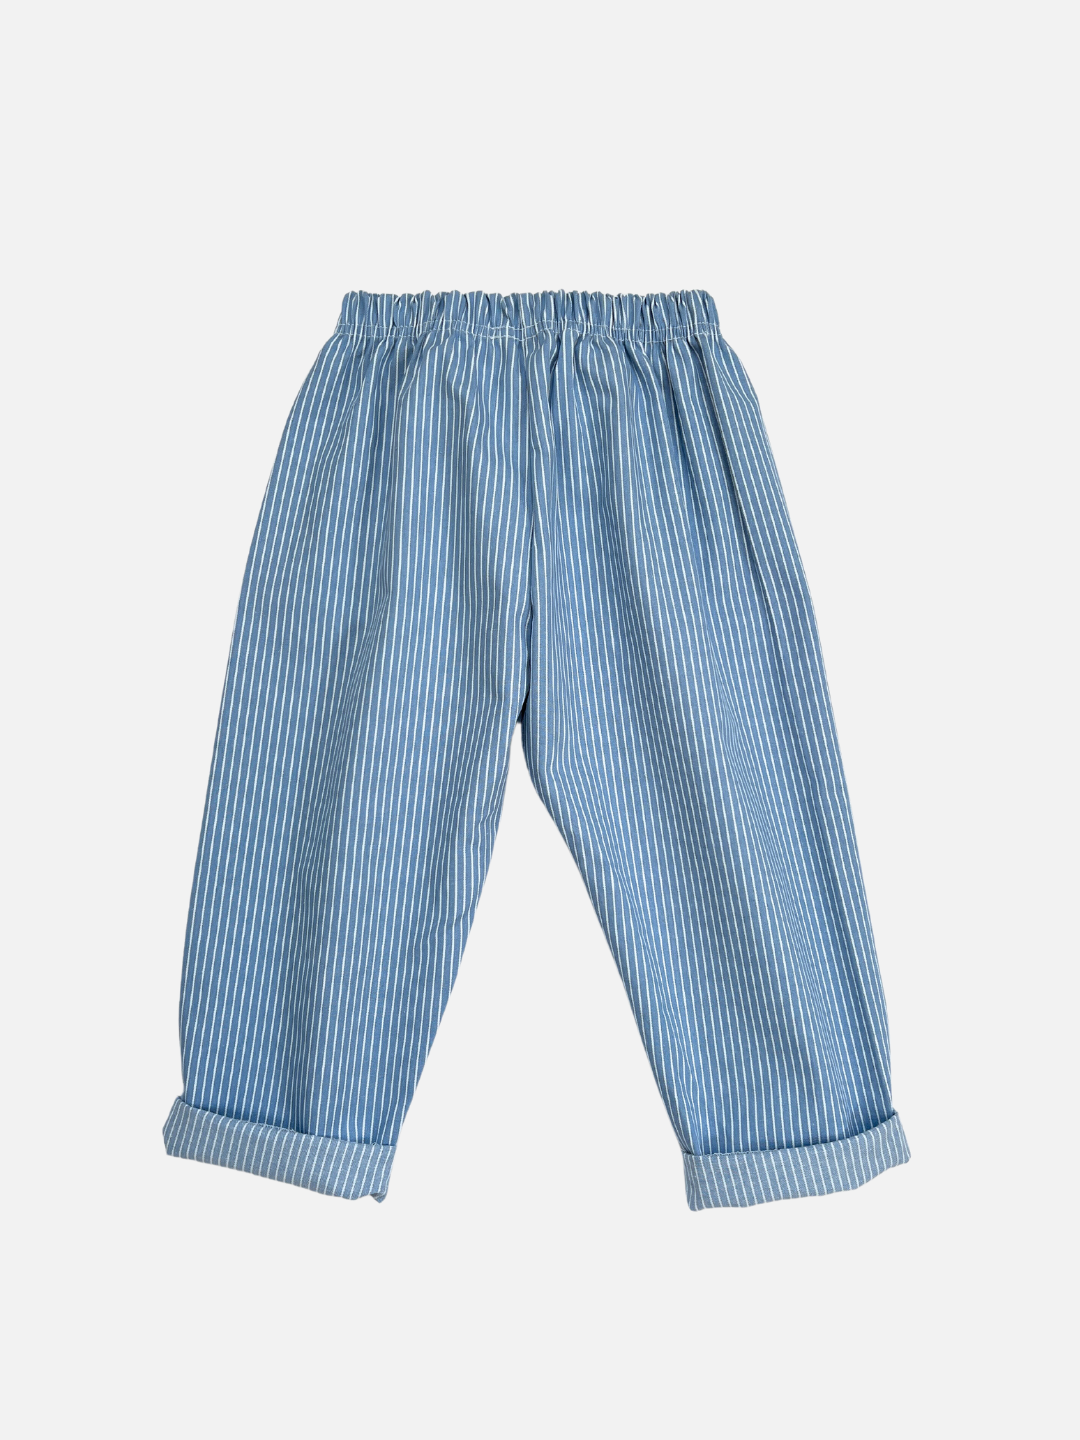 Sky | Back view of kids light blue pants with narrow white vertical stripes, cuffed at the ankle.